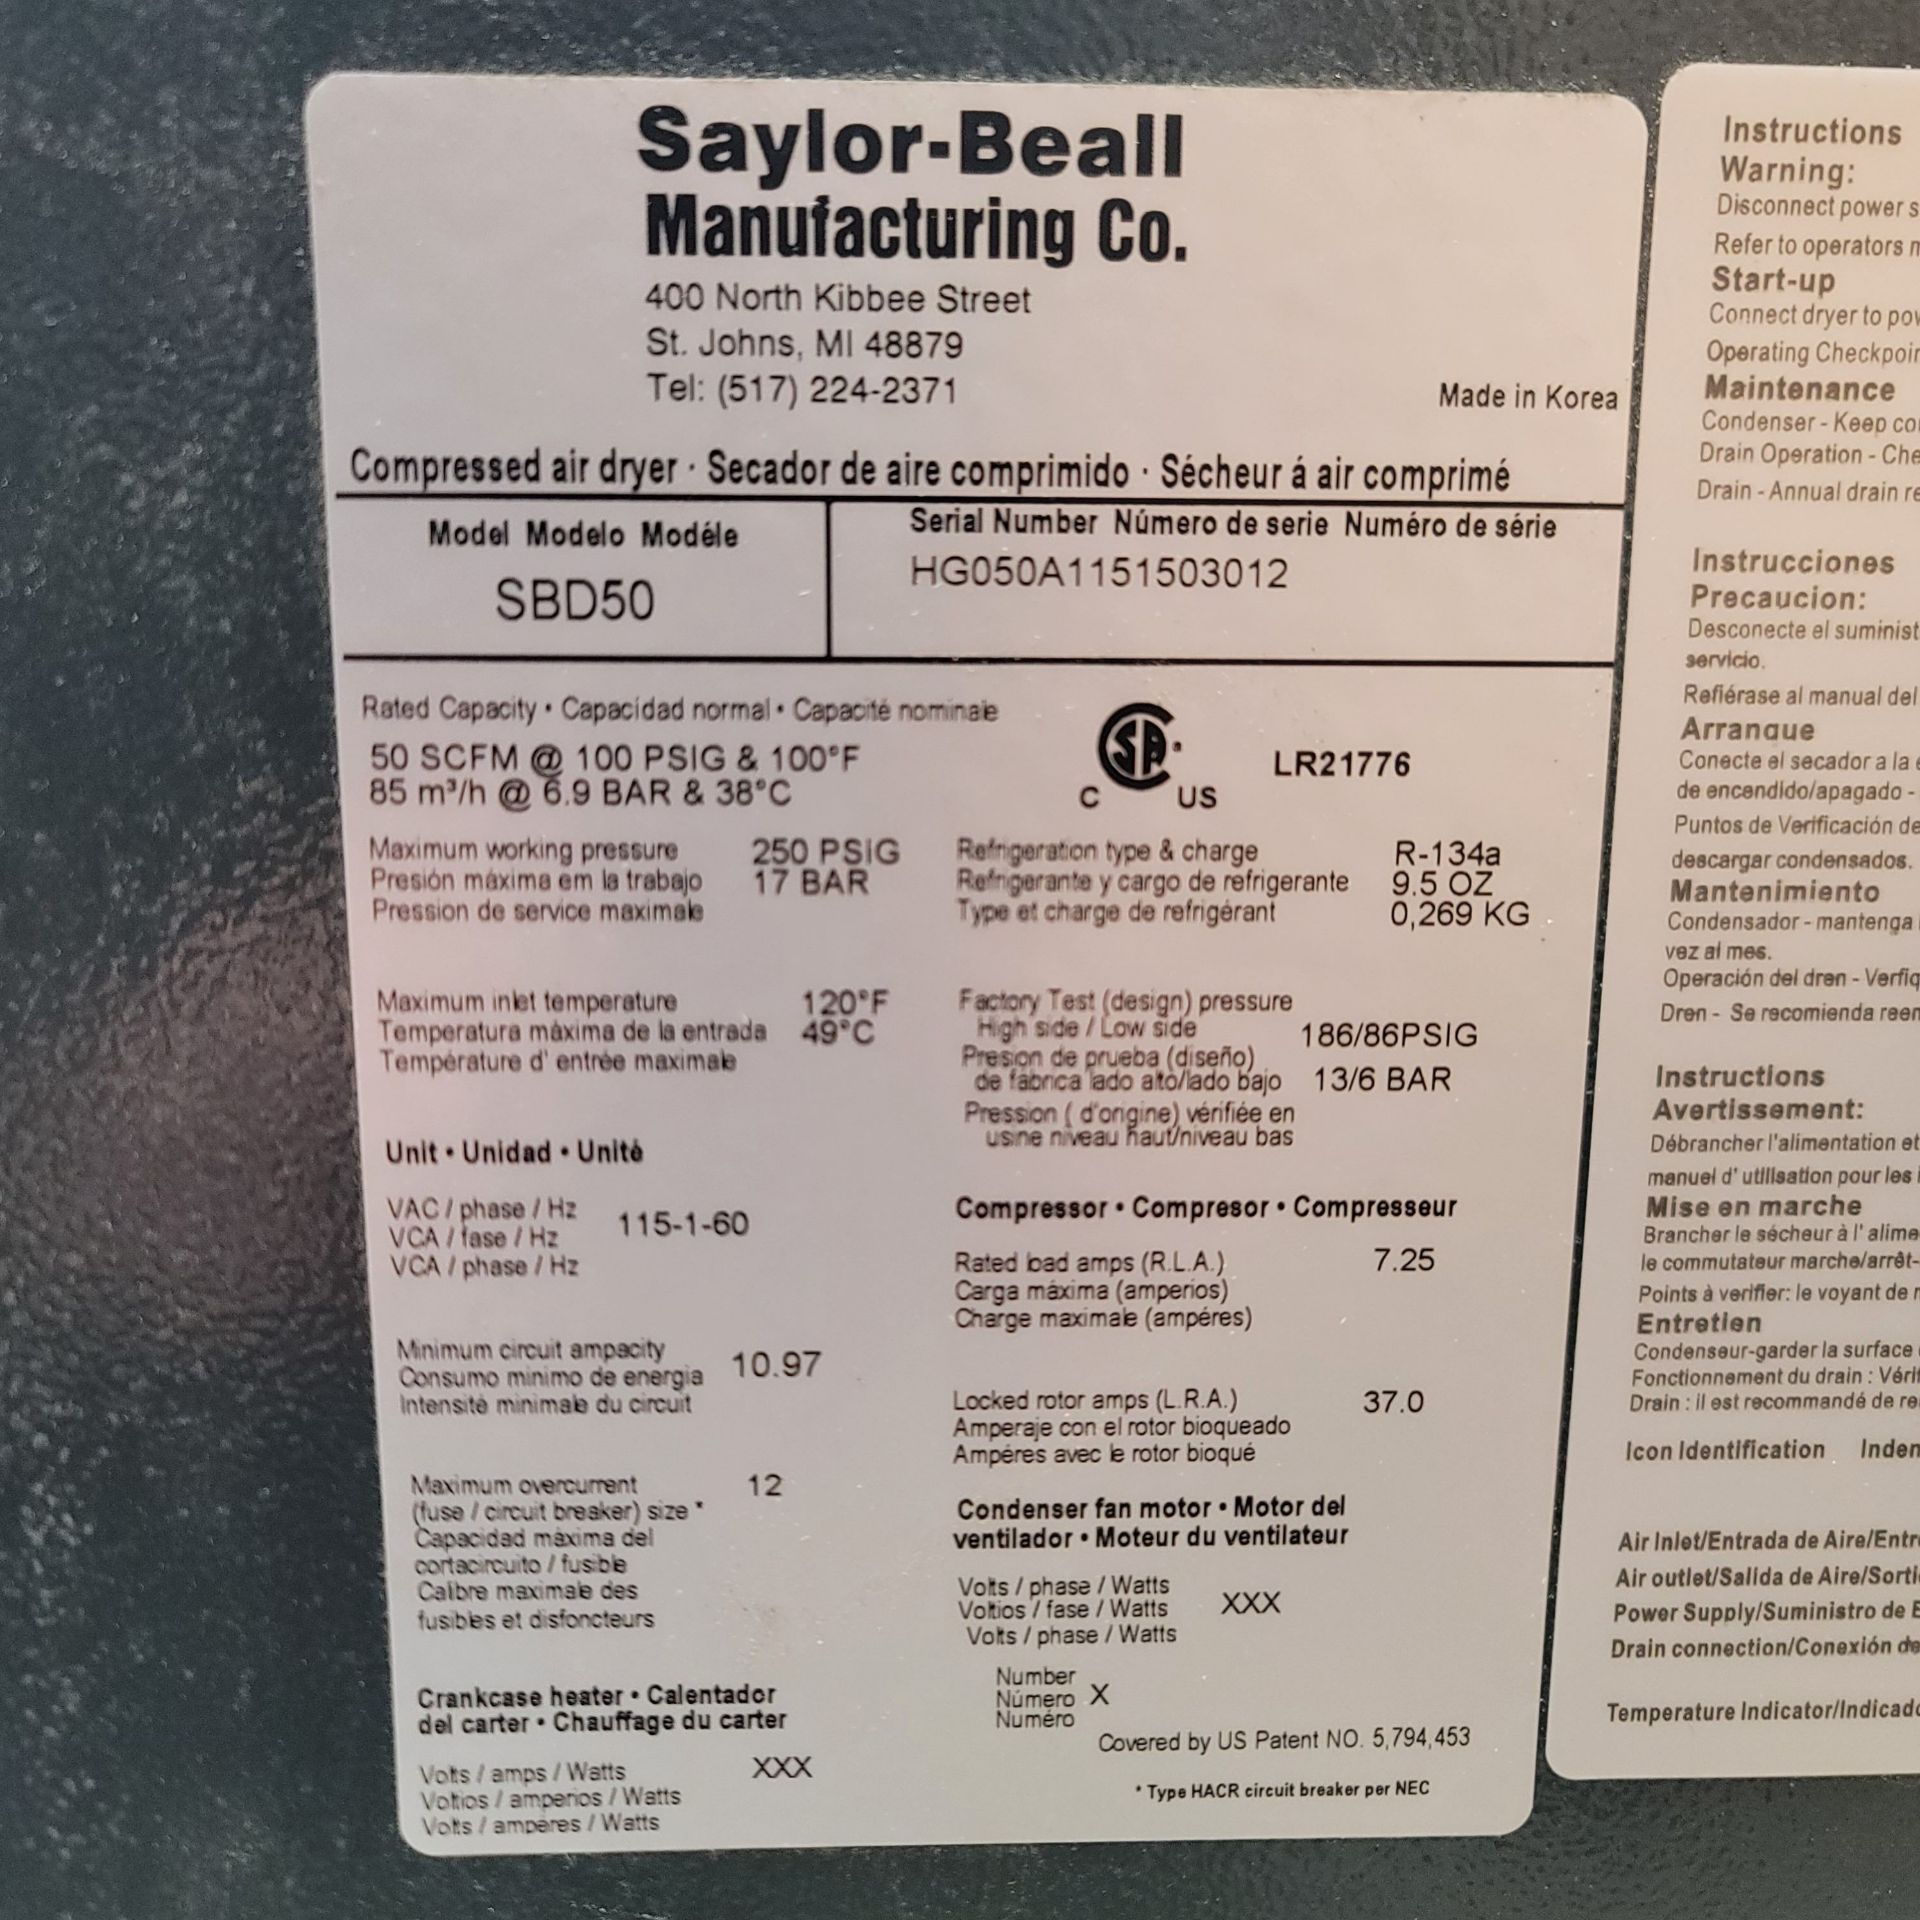 SAYLOR-BEALL REFRIGERATED AIR DRYER, MODEL SBD50, S/N HG050A1151503012, BRAND NEW, NEVER UNBOXED - Image 3 of 4